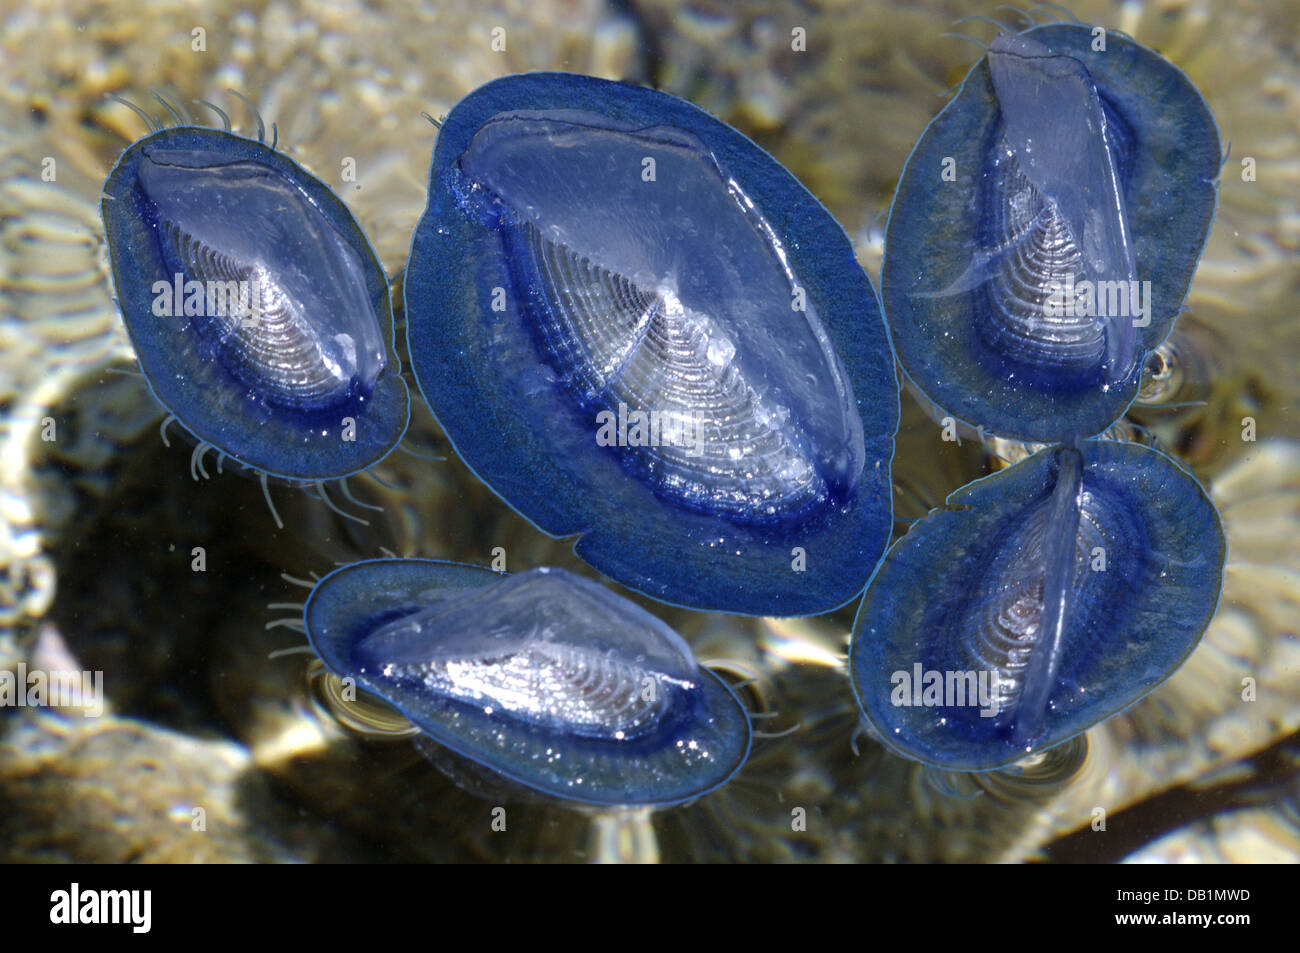 By-the-wind sailor (Velella spirans or Velella velella), photographed at the island of Giglio, Tuscany, Italy Stock Photo